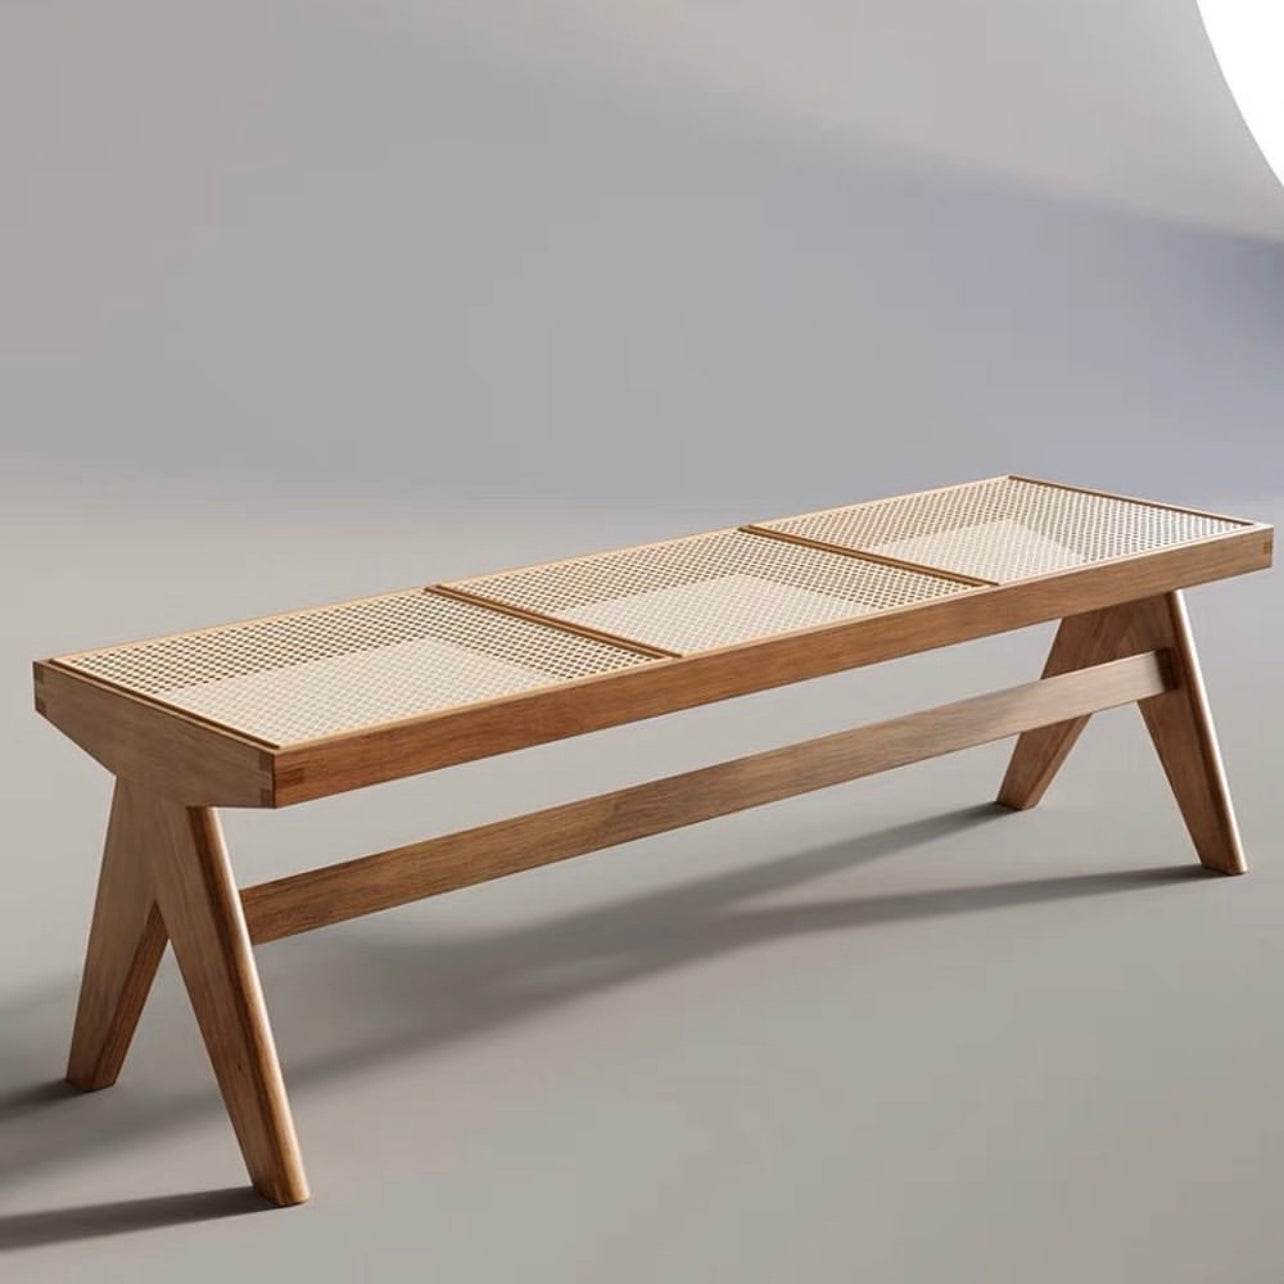 Hommie Contemporary Wood Bench HBBE007